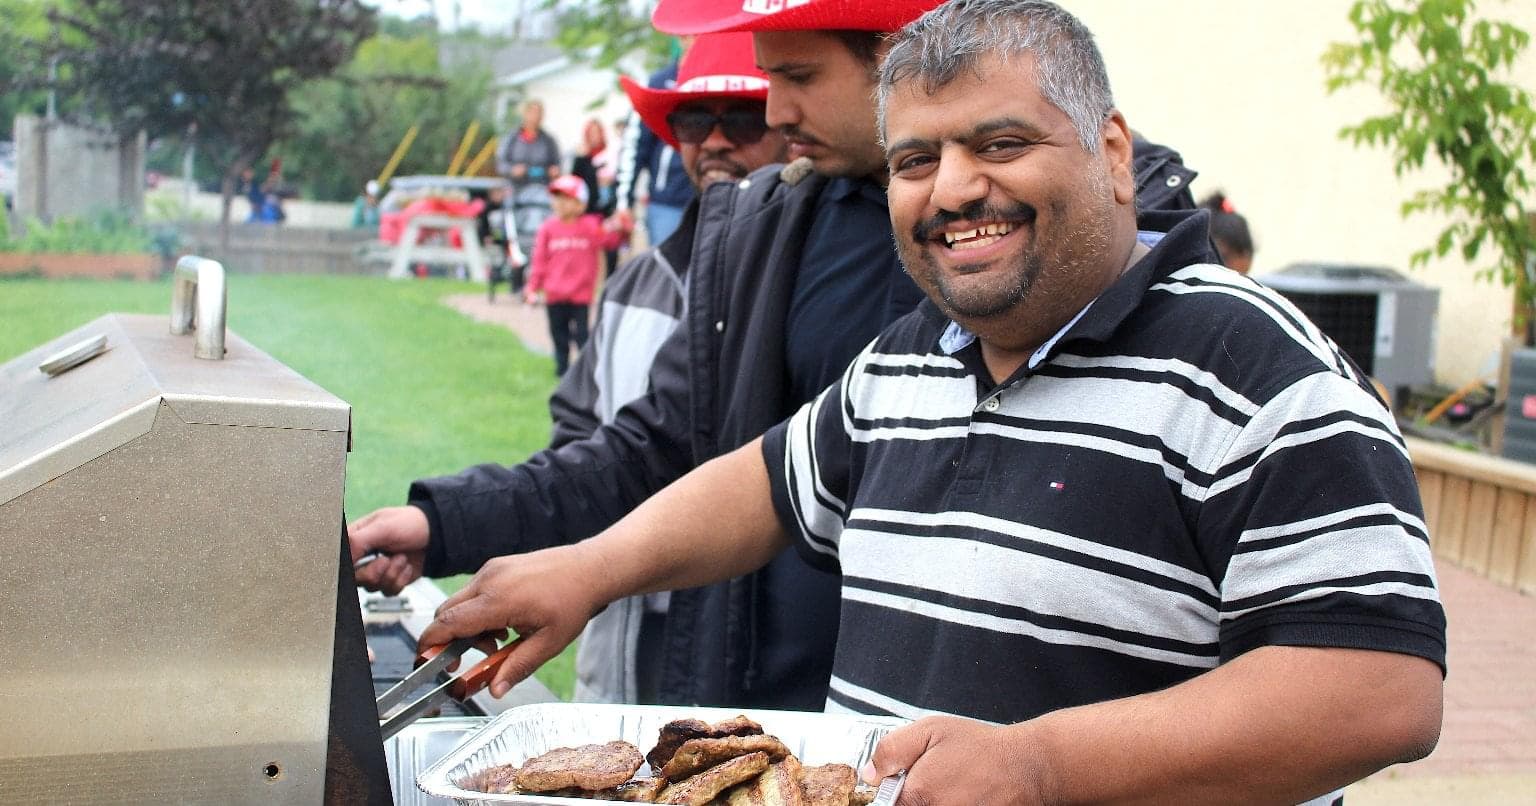 A man smiles at the camera while barbecuing burgers.